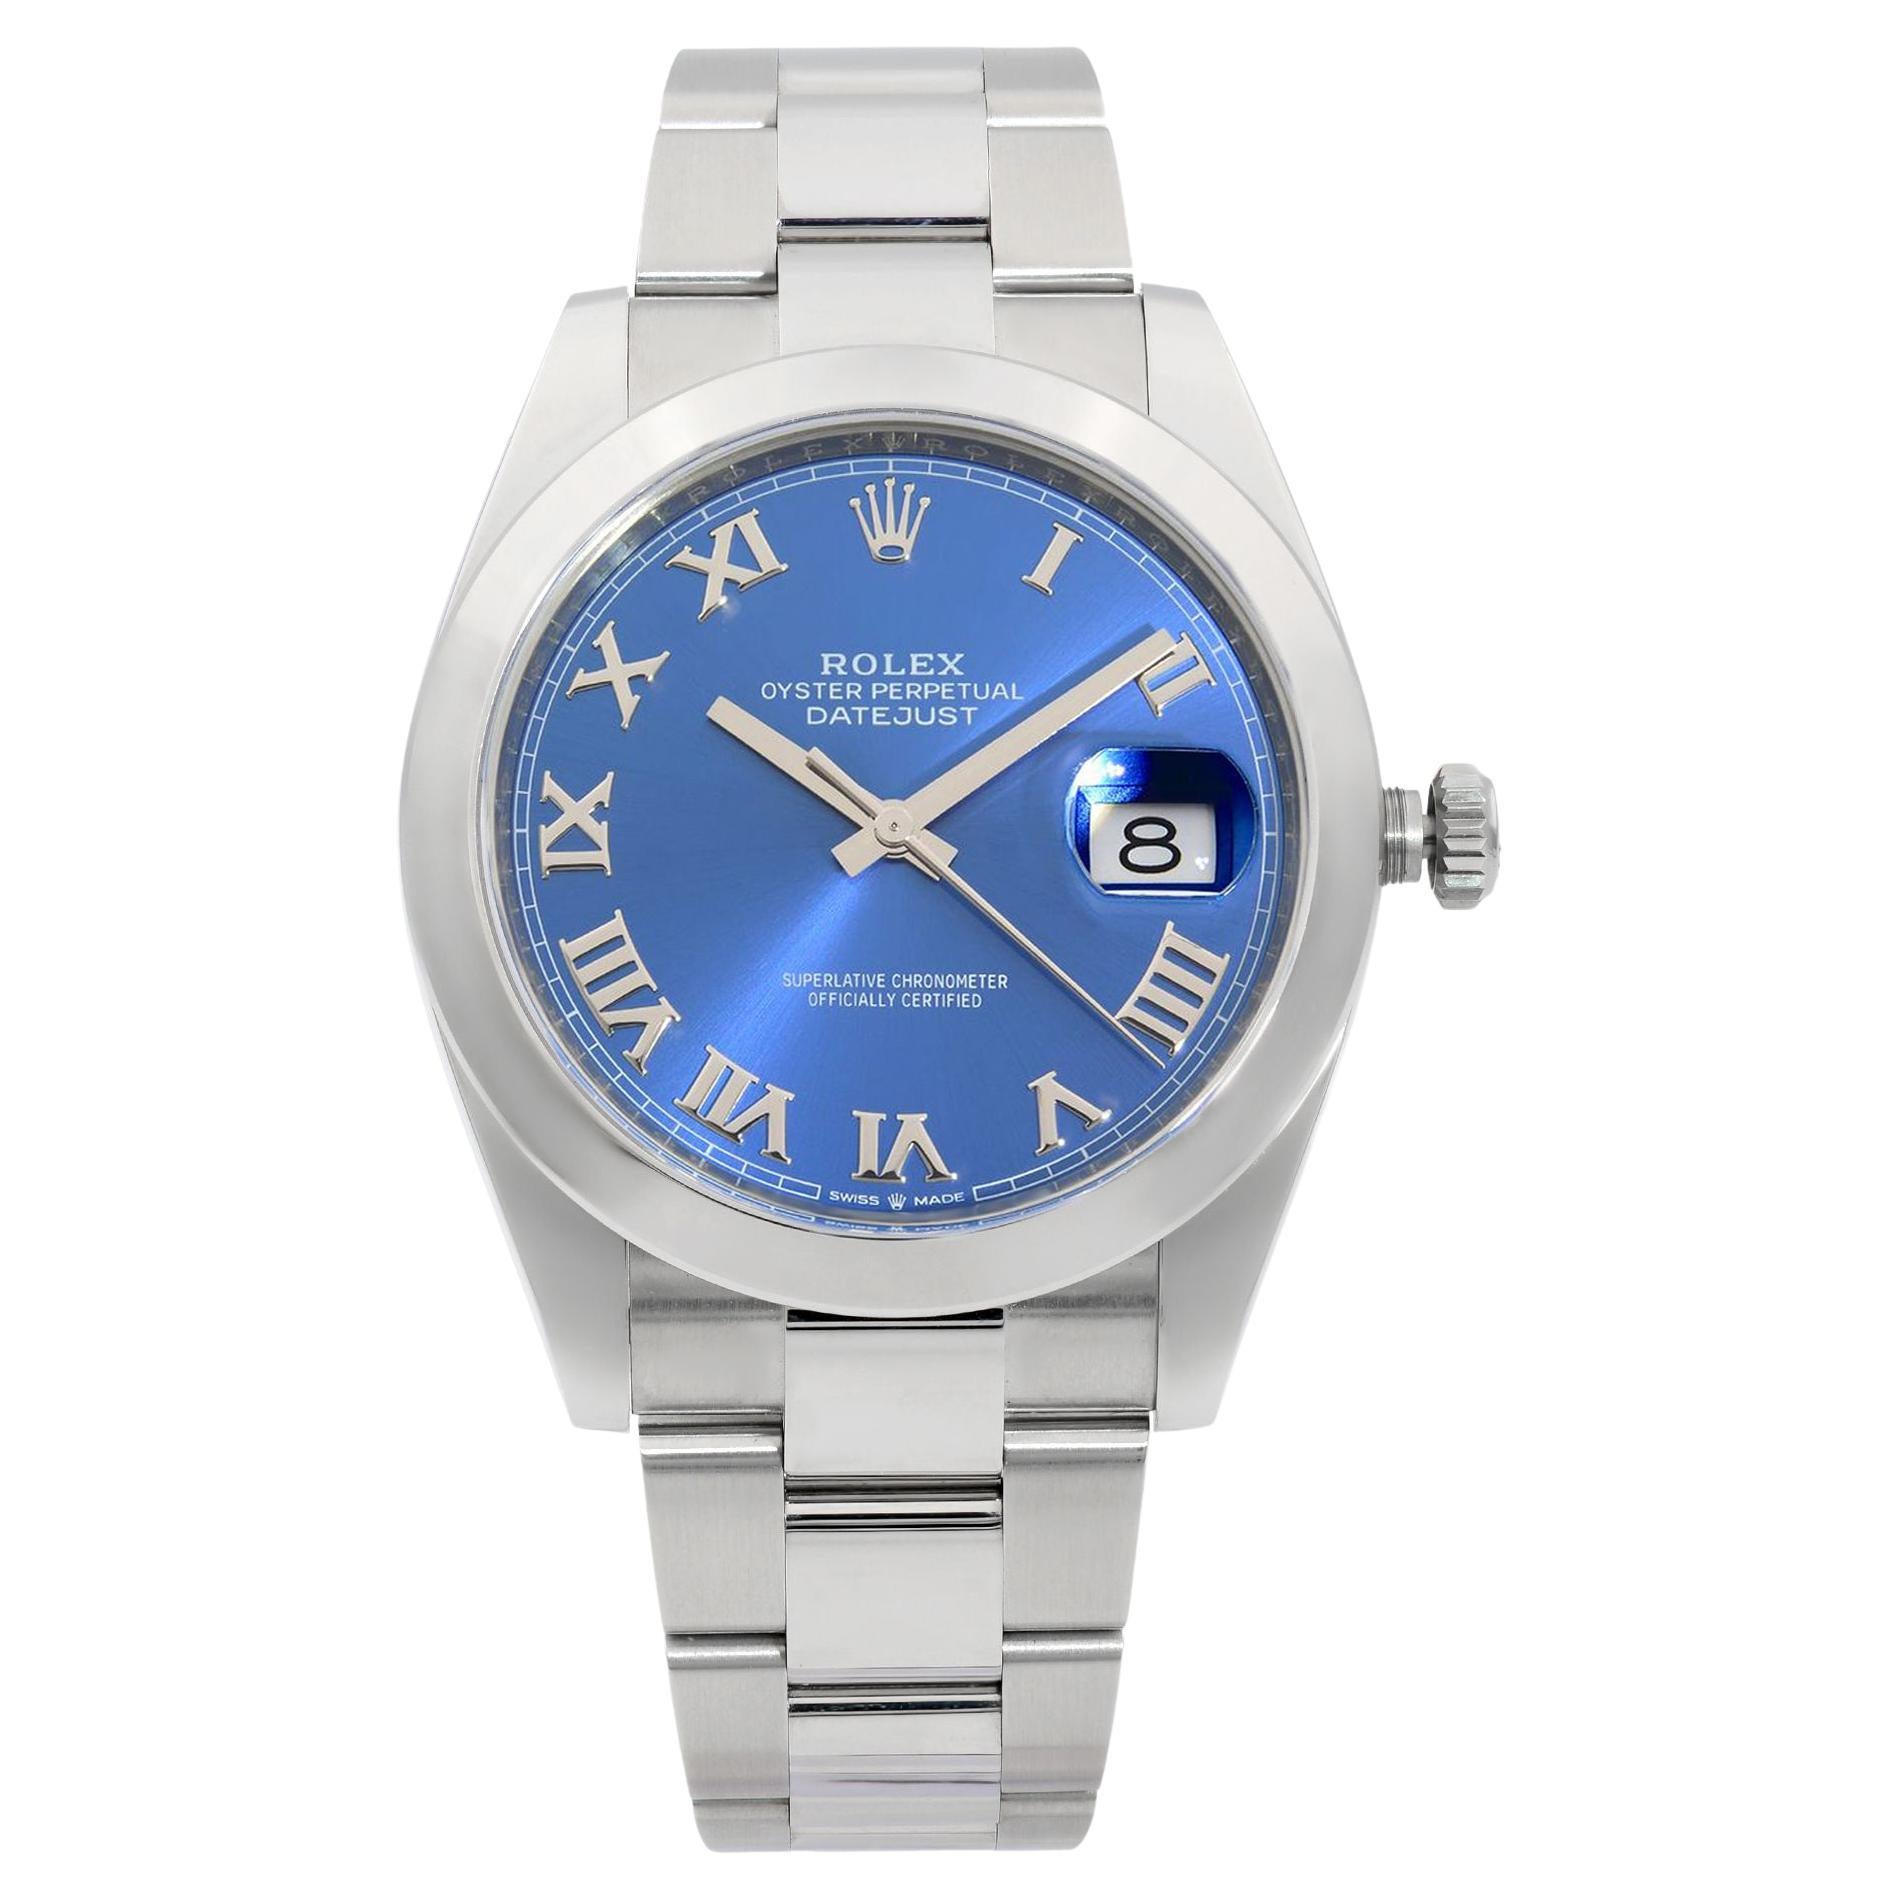 Rolex Datejust 41mm Stainless Steel Blue Roman Dial Automatic Men Watch 126300